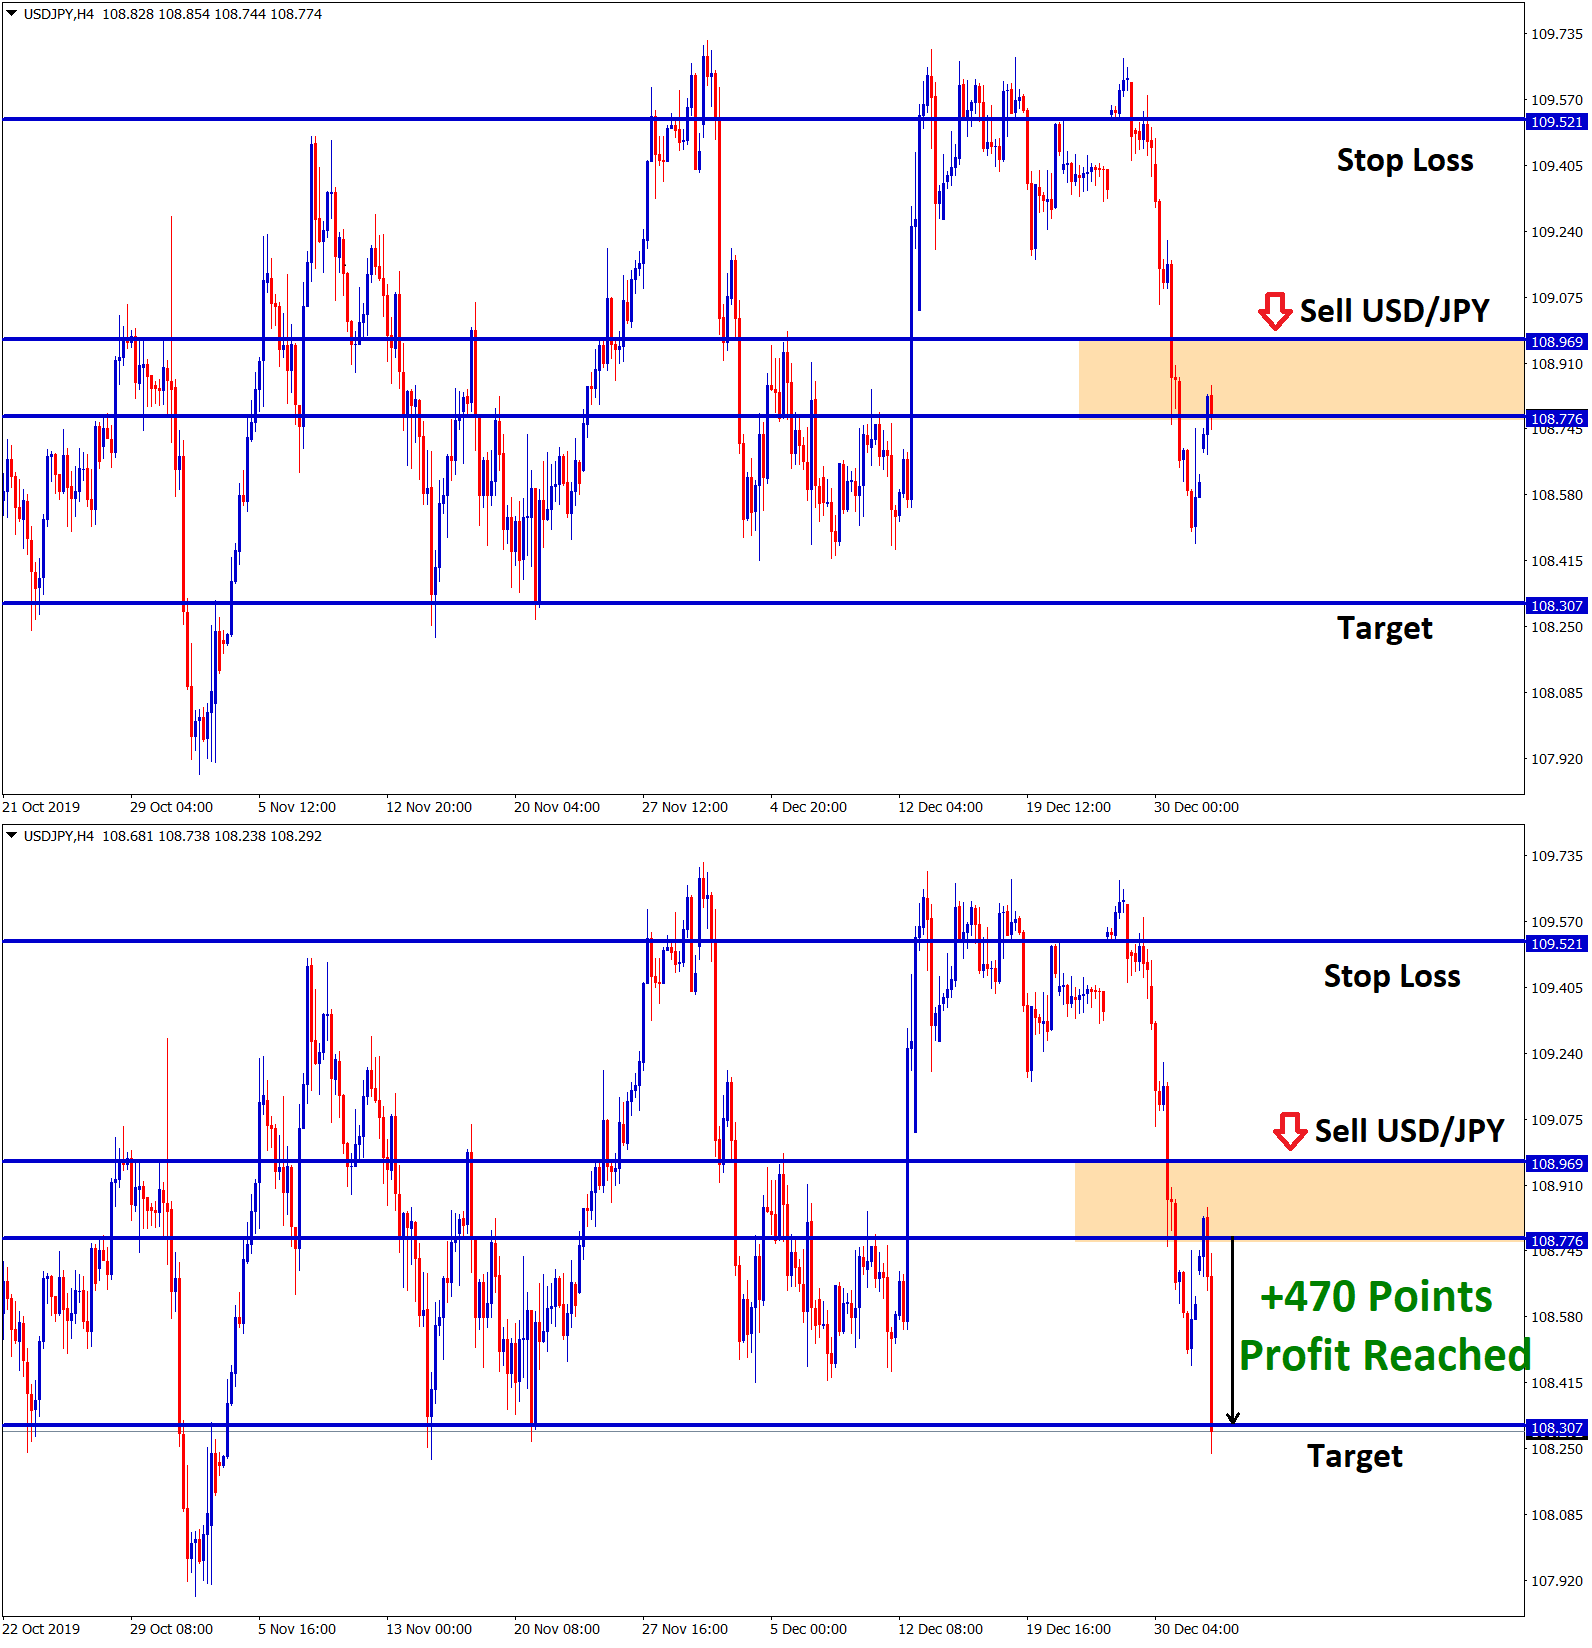 usd jpy reached take profit in sell signal